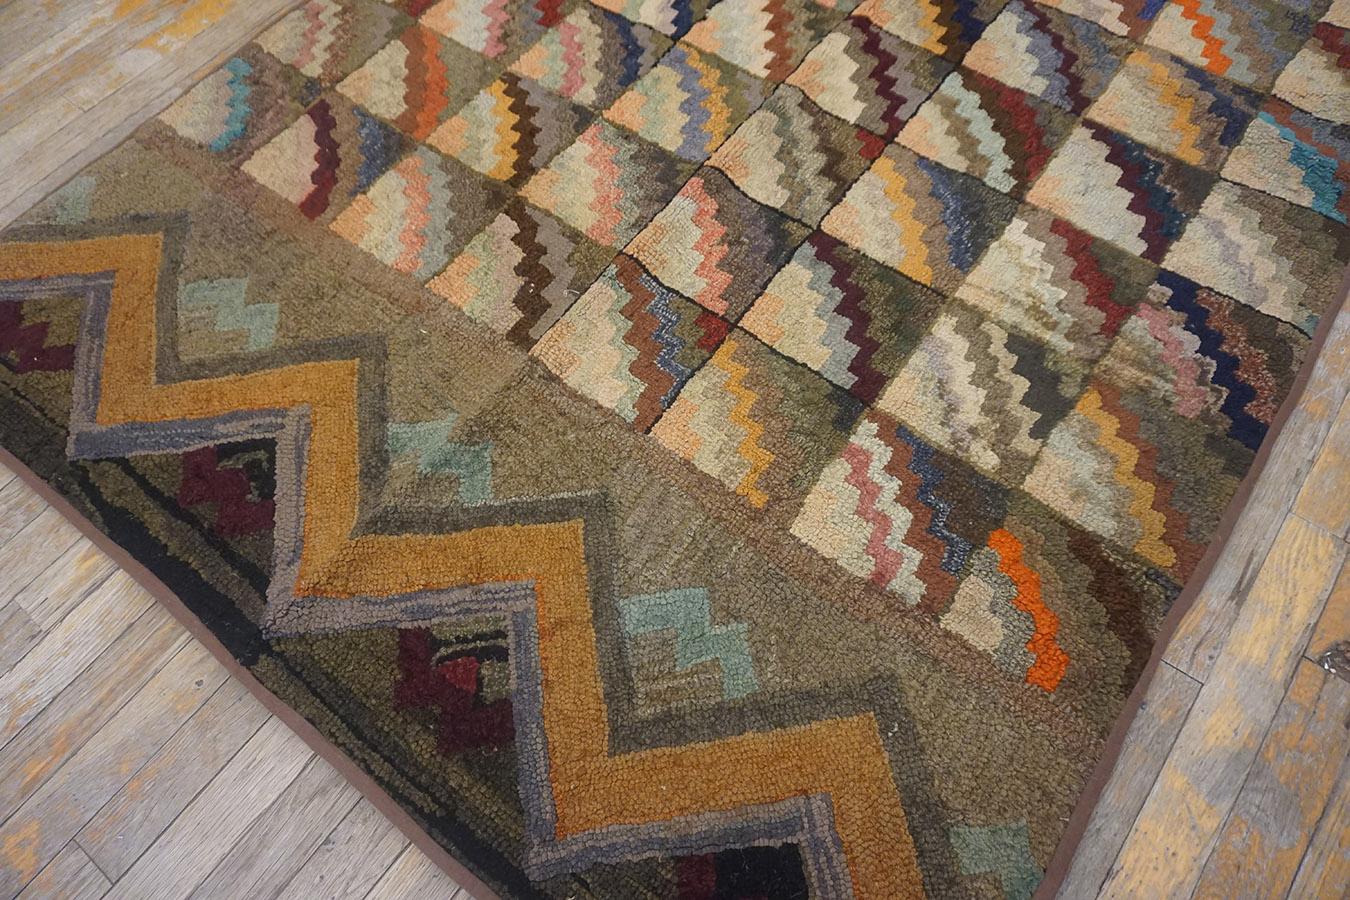 Early 20th Century American Hooked Rug ( 4'4